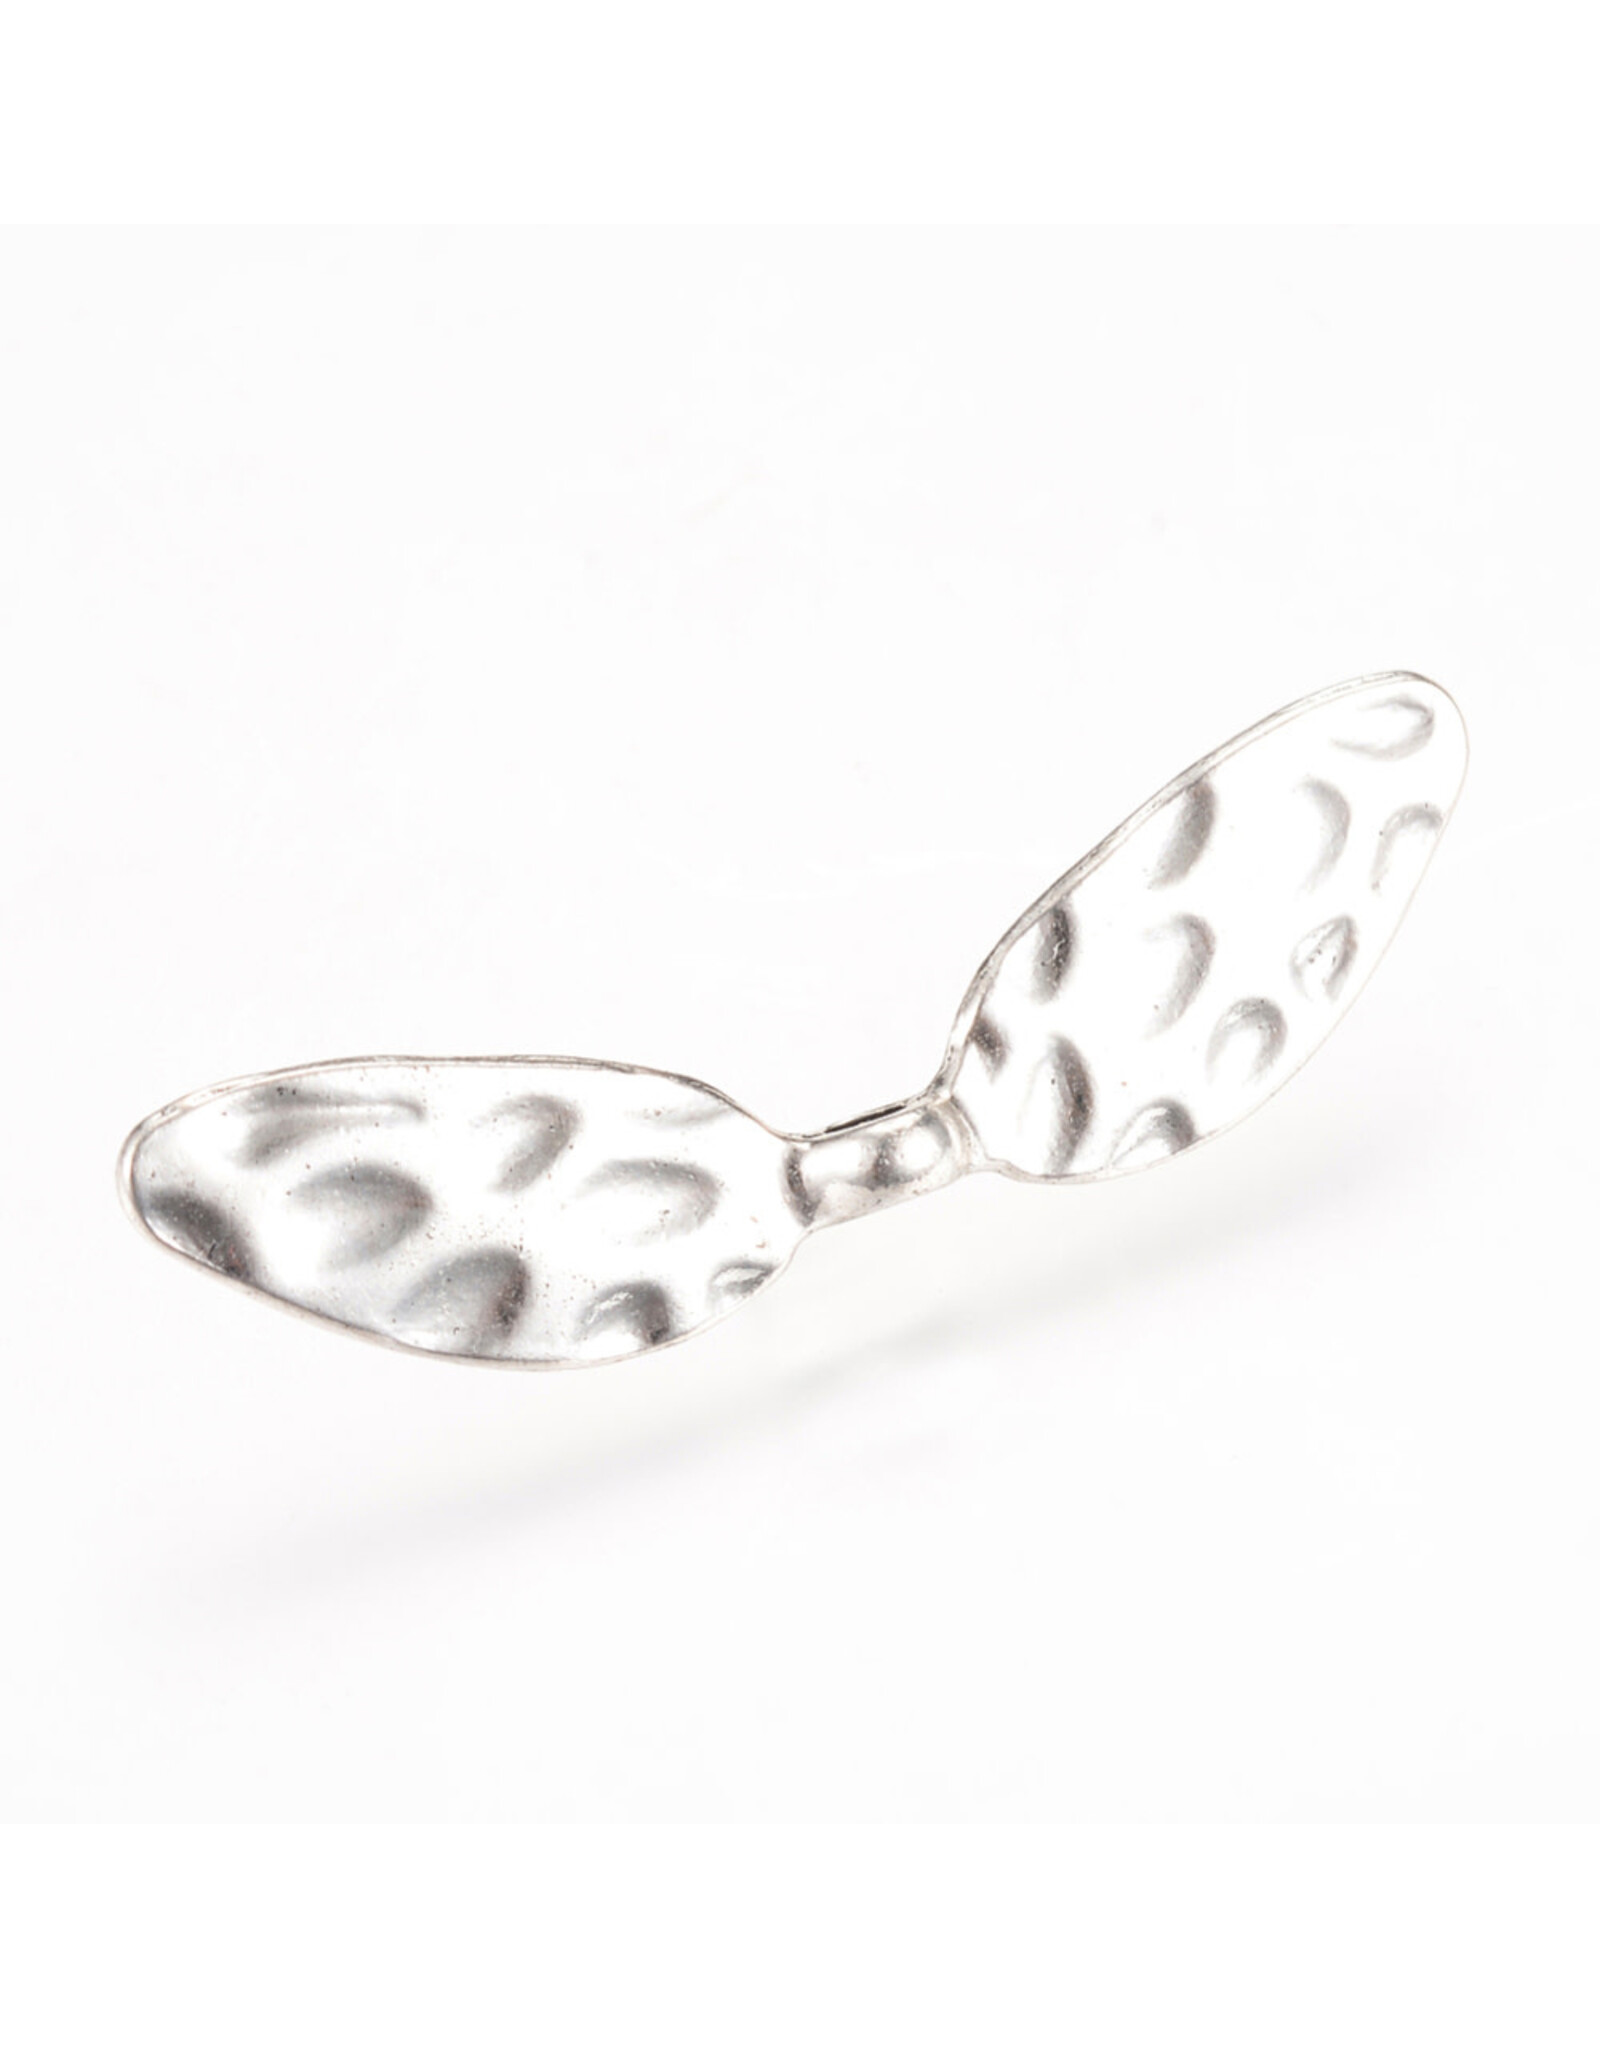 Wing Bead Antique Silver 11x42x5mm   x10   NF